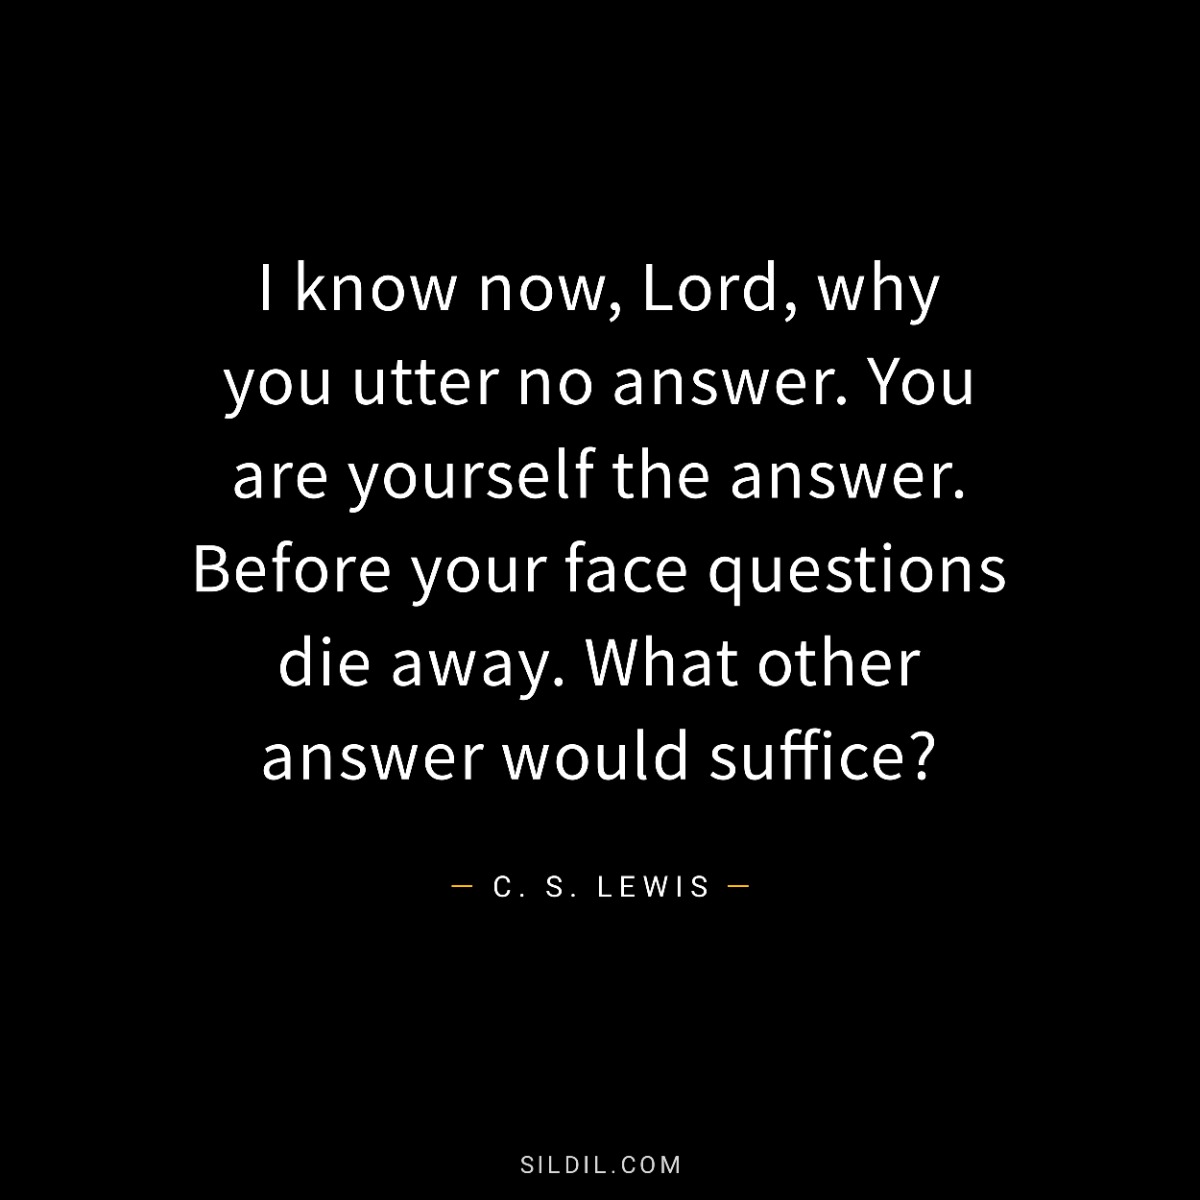 I know now, Lord, why you utter no answer. You are yourself the answer. Before your face questions die away. What other answer would suffice?